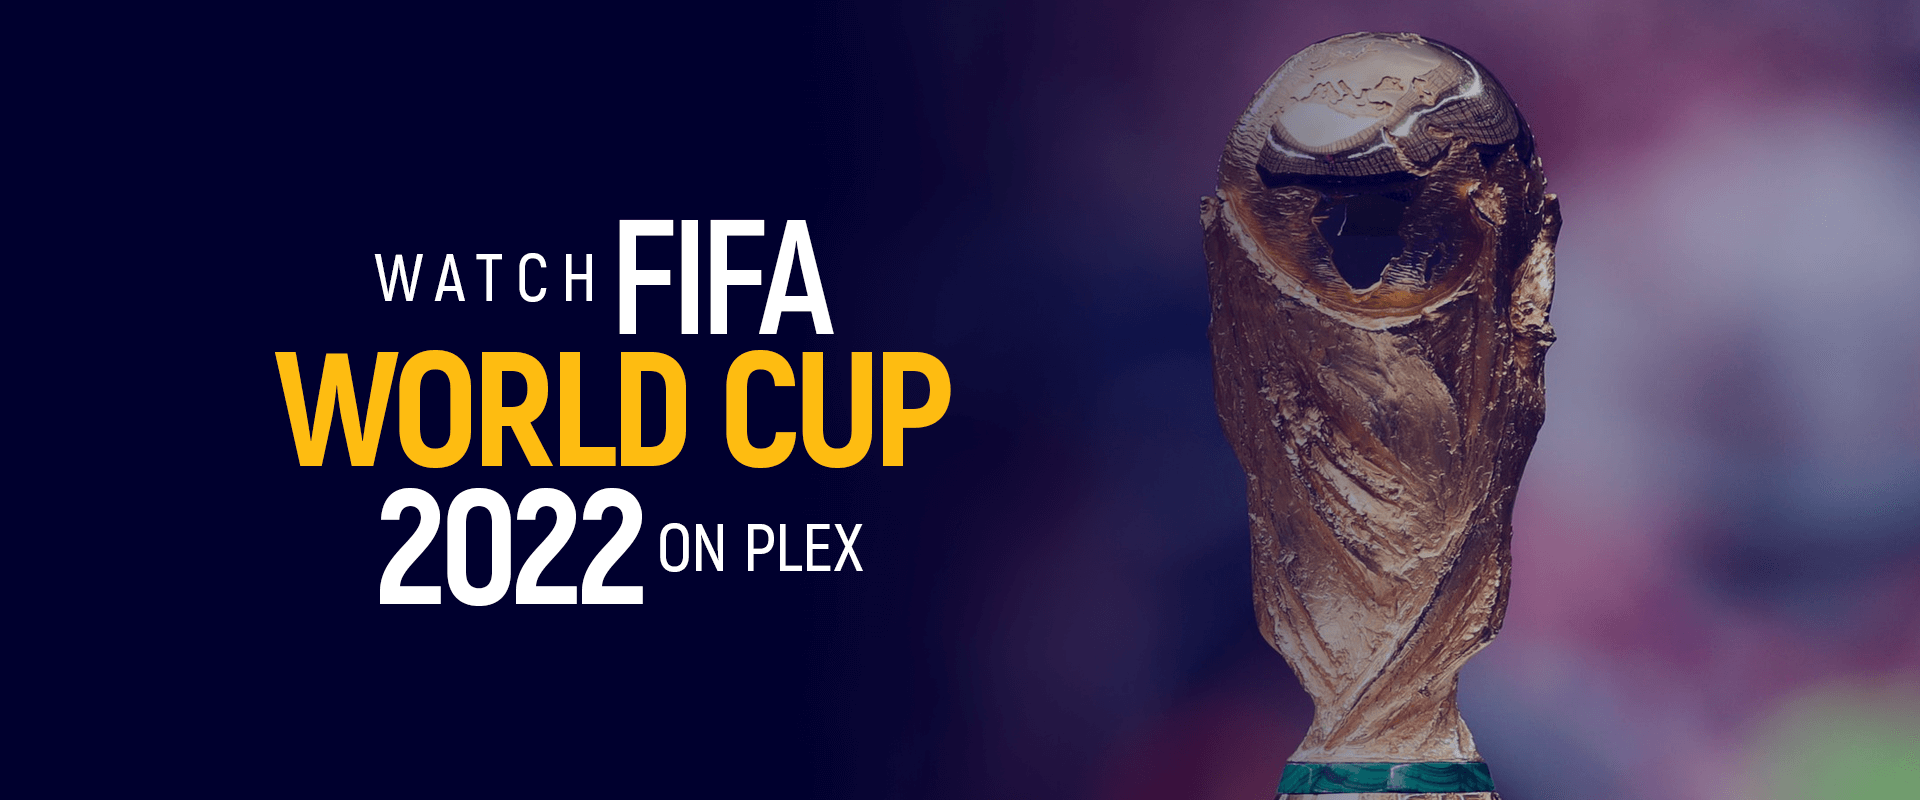 How to Watch FIFA World Cup 2022 on Plex